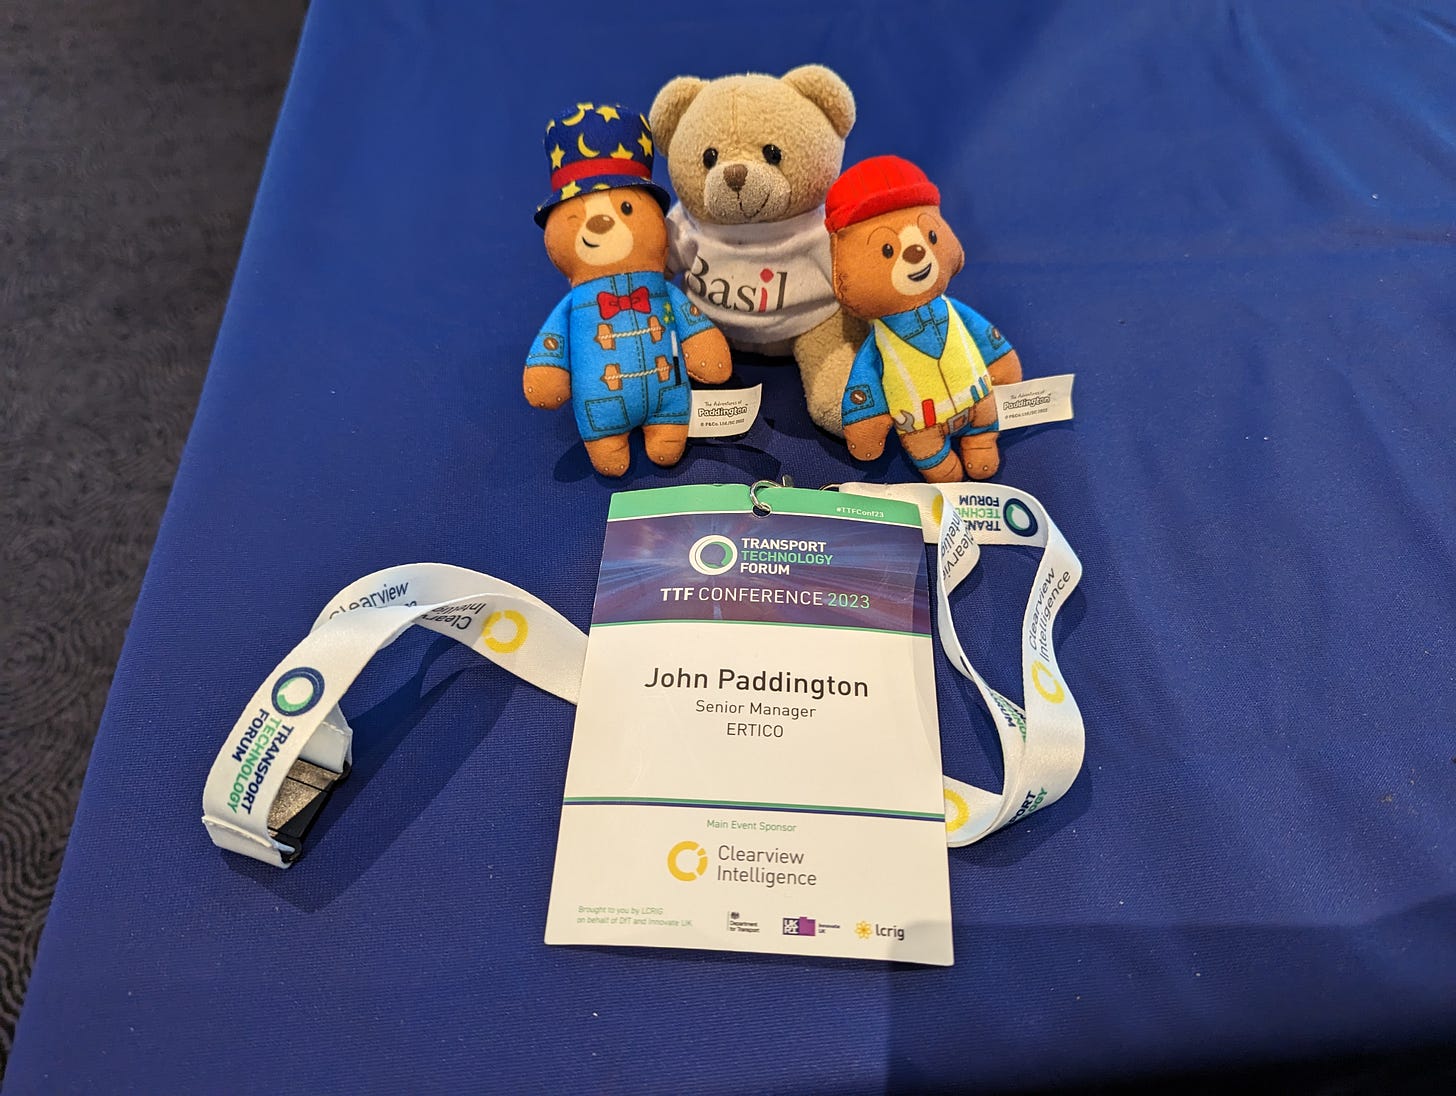 Photo of two Paddingtons (one with a magican hat and one wearing hi vis), Travel Basil teddy bear along with my conference badge